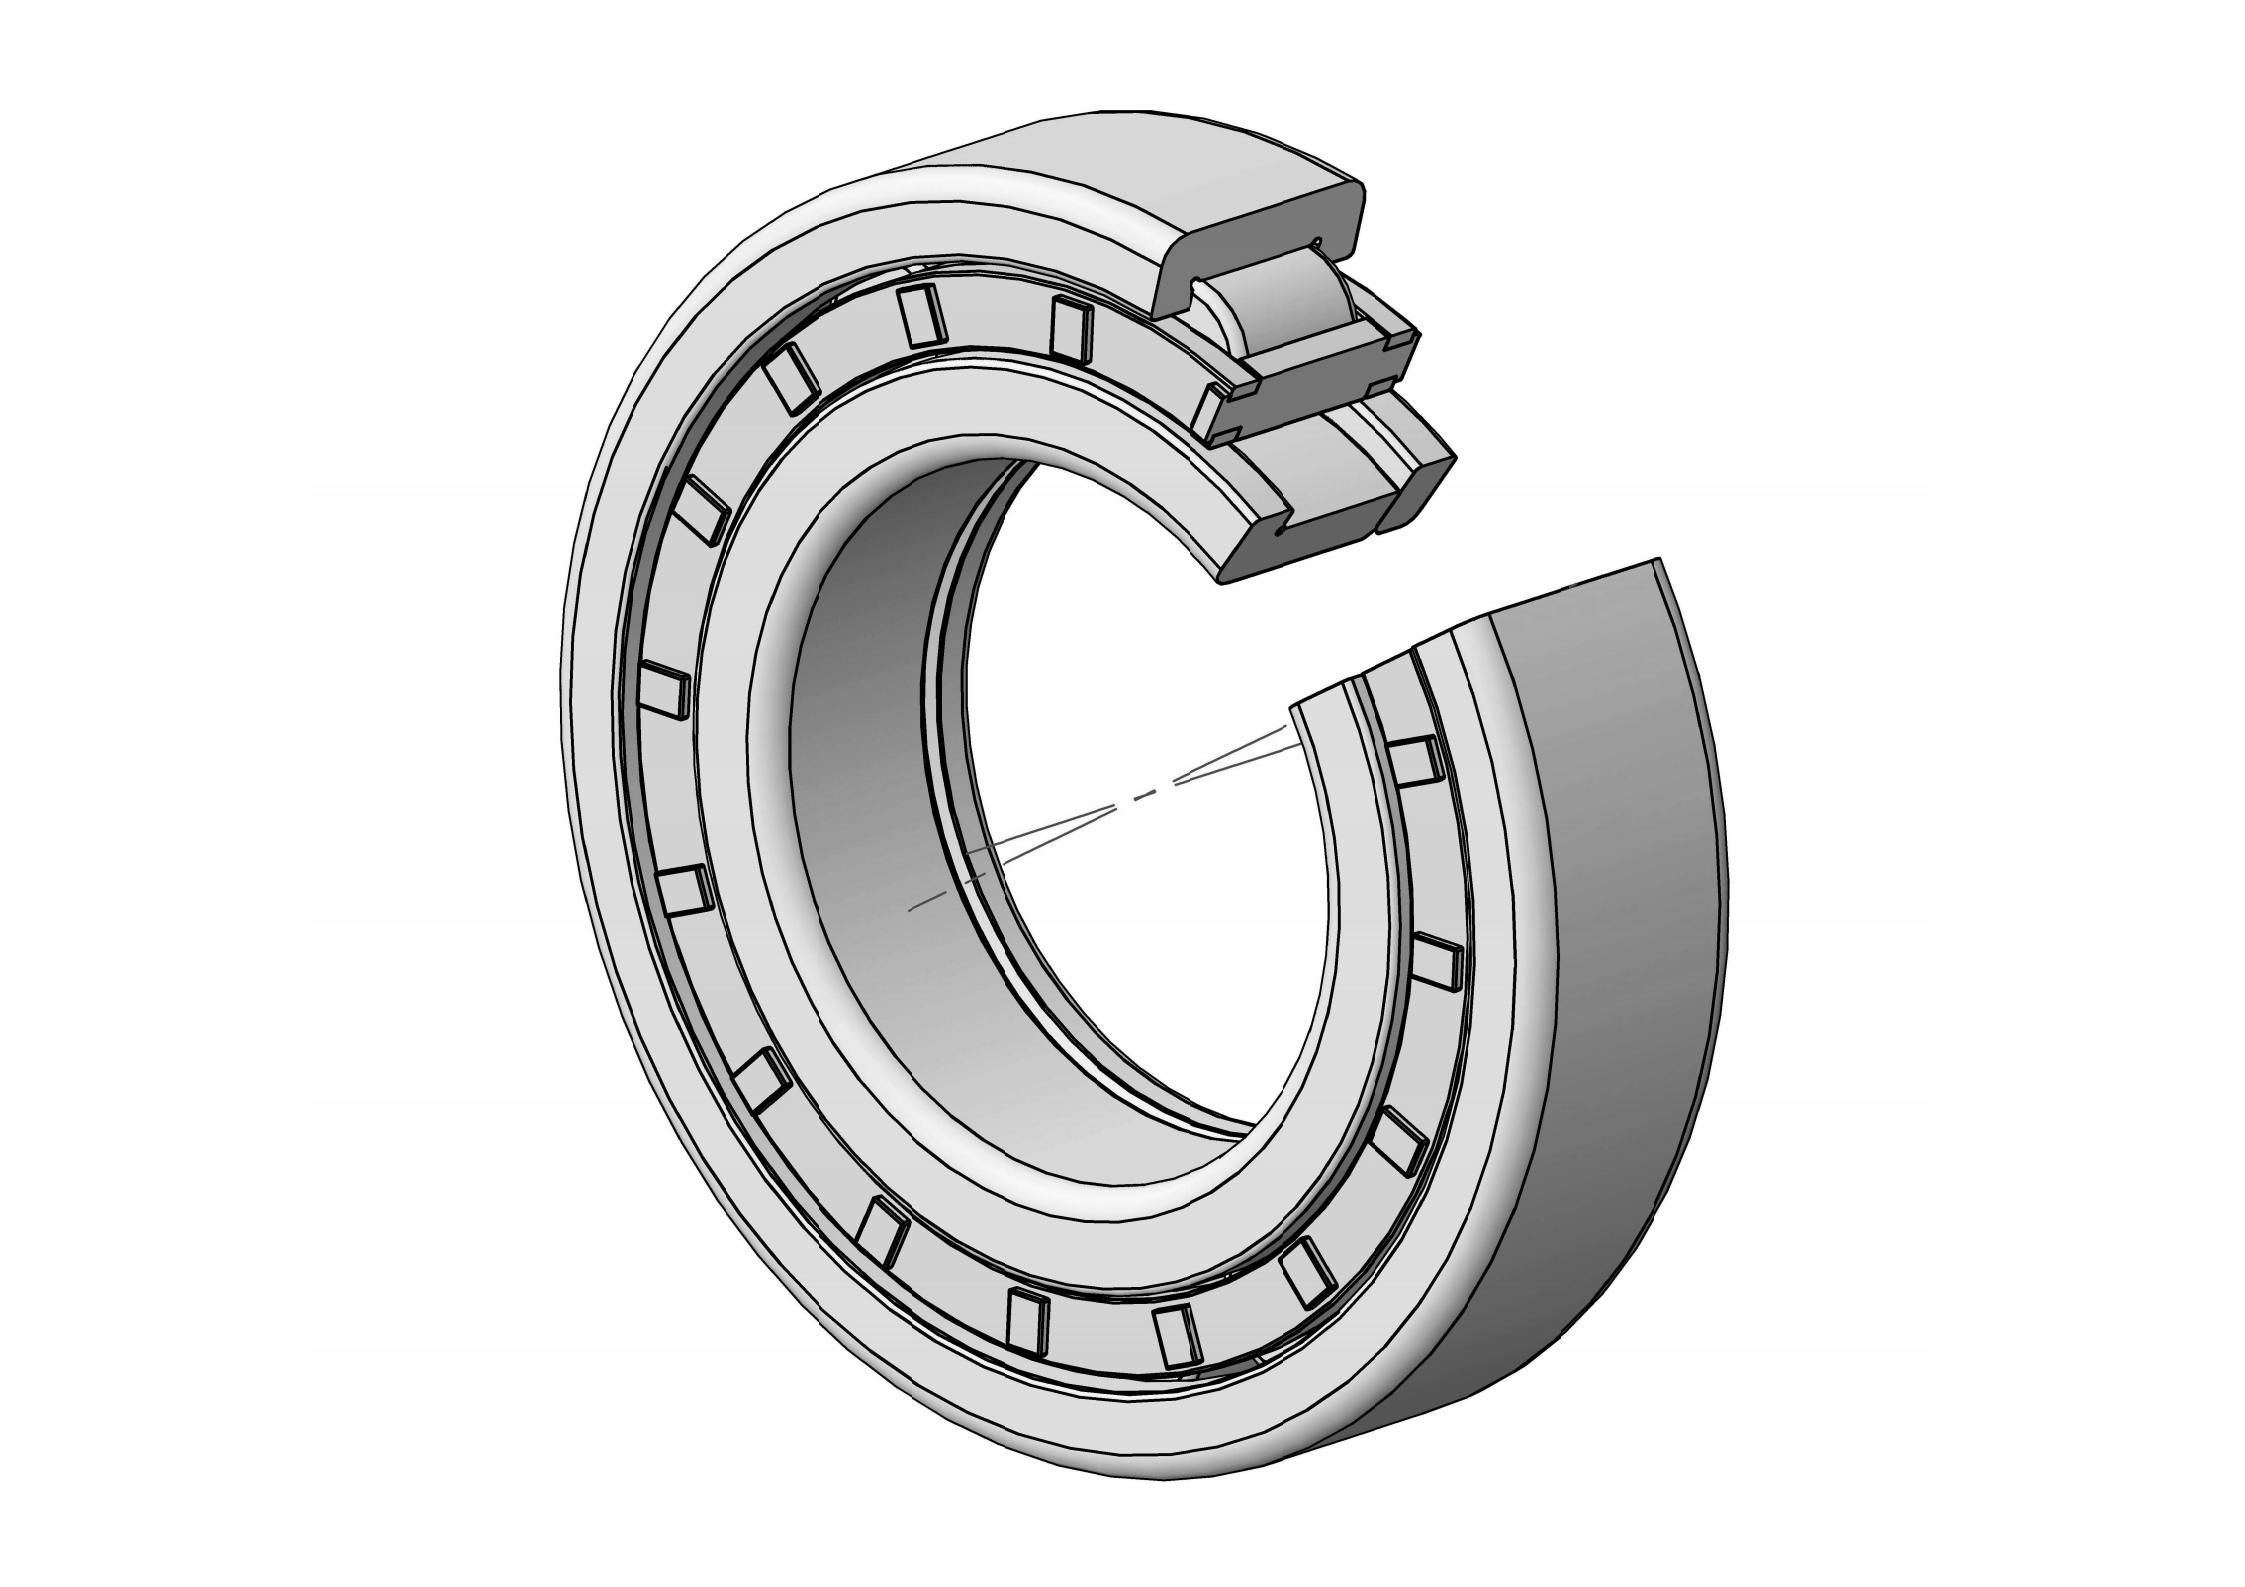 NUP2313-E Single Row Cylindrical roller bearing 